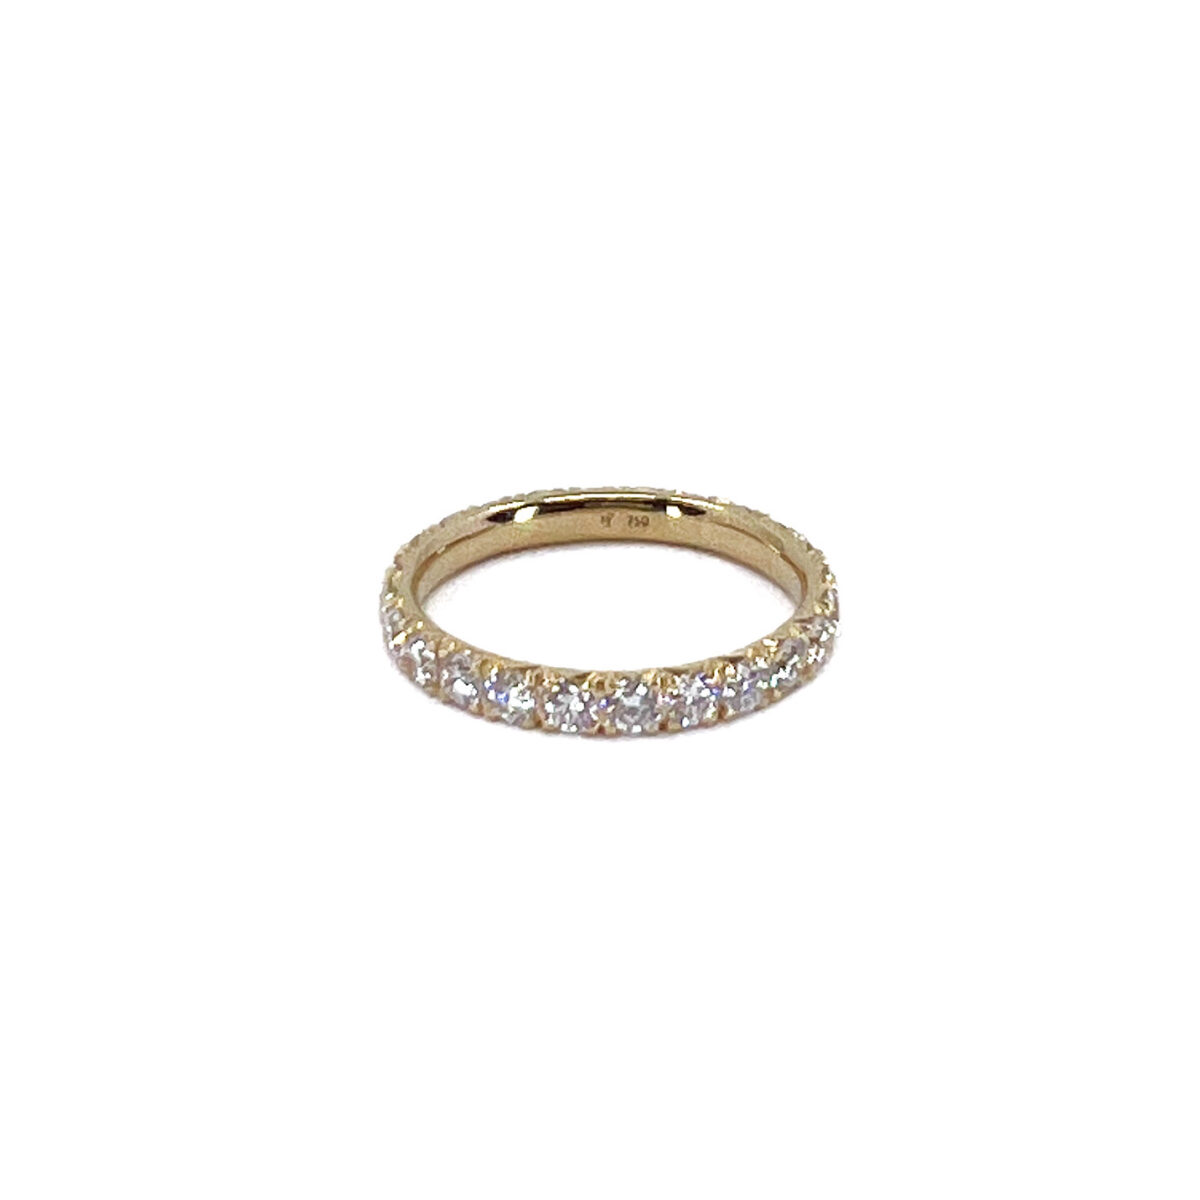 1.33 CT Diamond and Yellow Gold Eternity Band